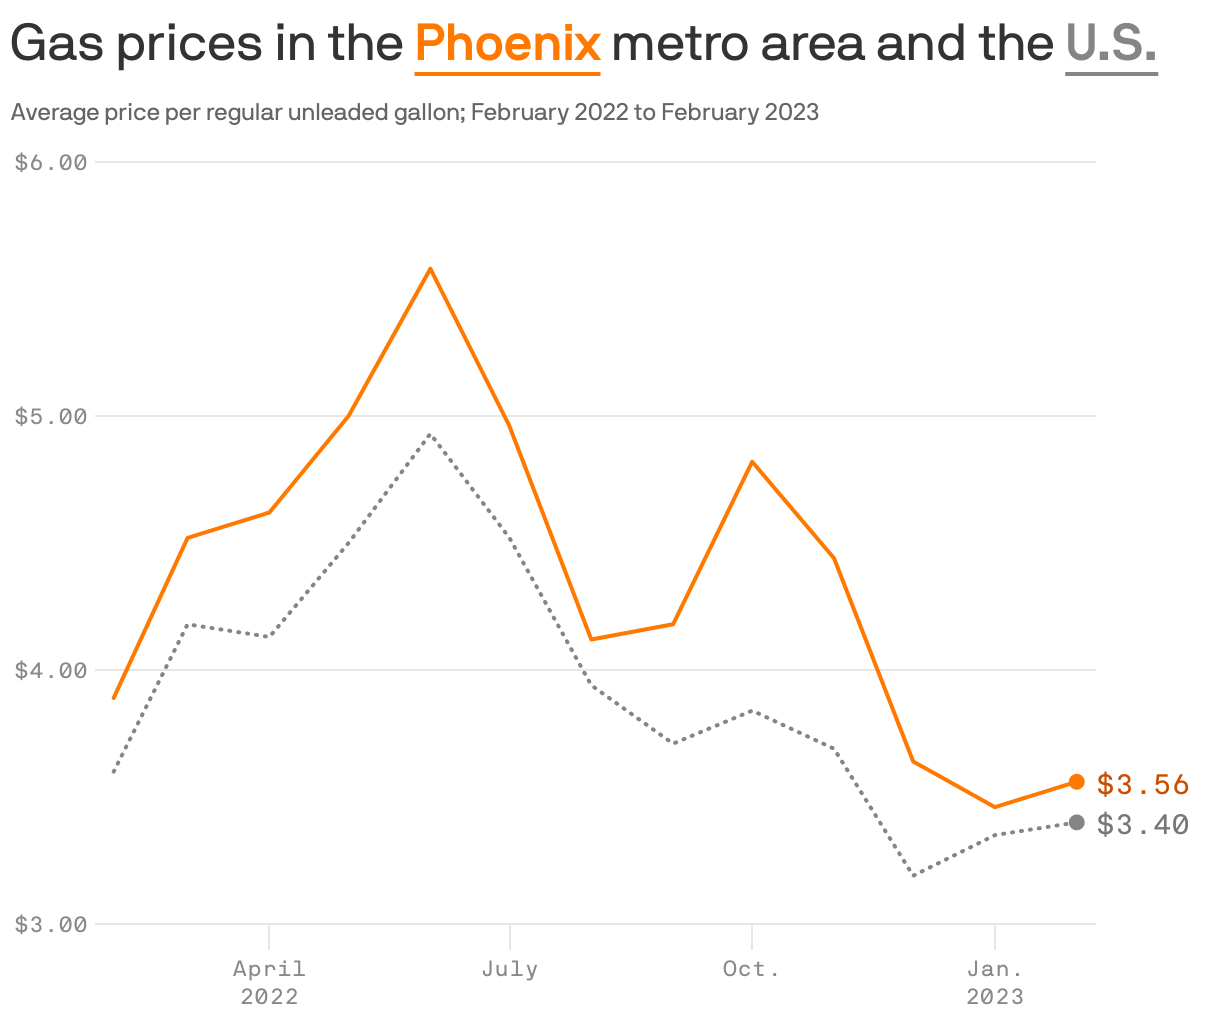 Gas prices in the <b style='text-decoration: underline; text-underline-position: under; color: #ff7900;'>Phoenix</b> metro area and the <b style='text-decoration: underline; text-underline-position: under; color: #858585;'>U.S.</b>